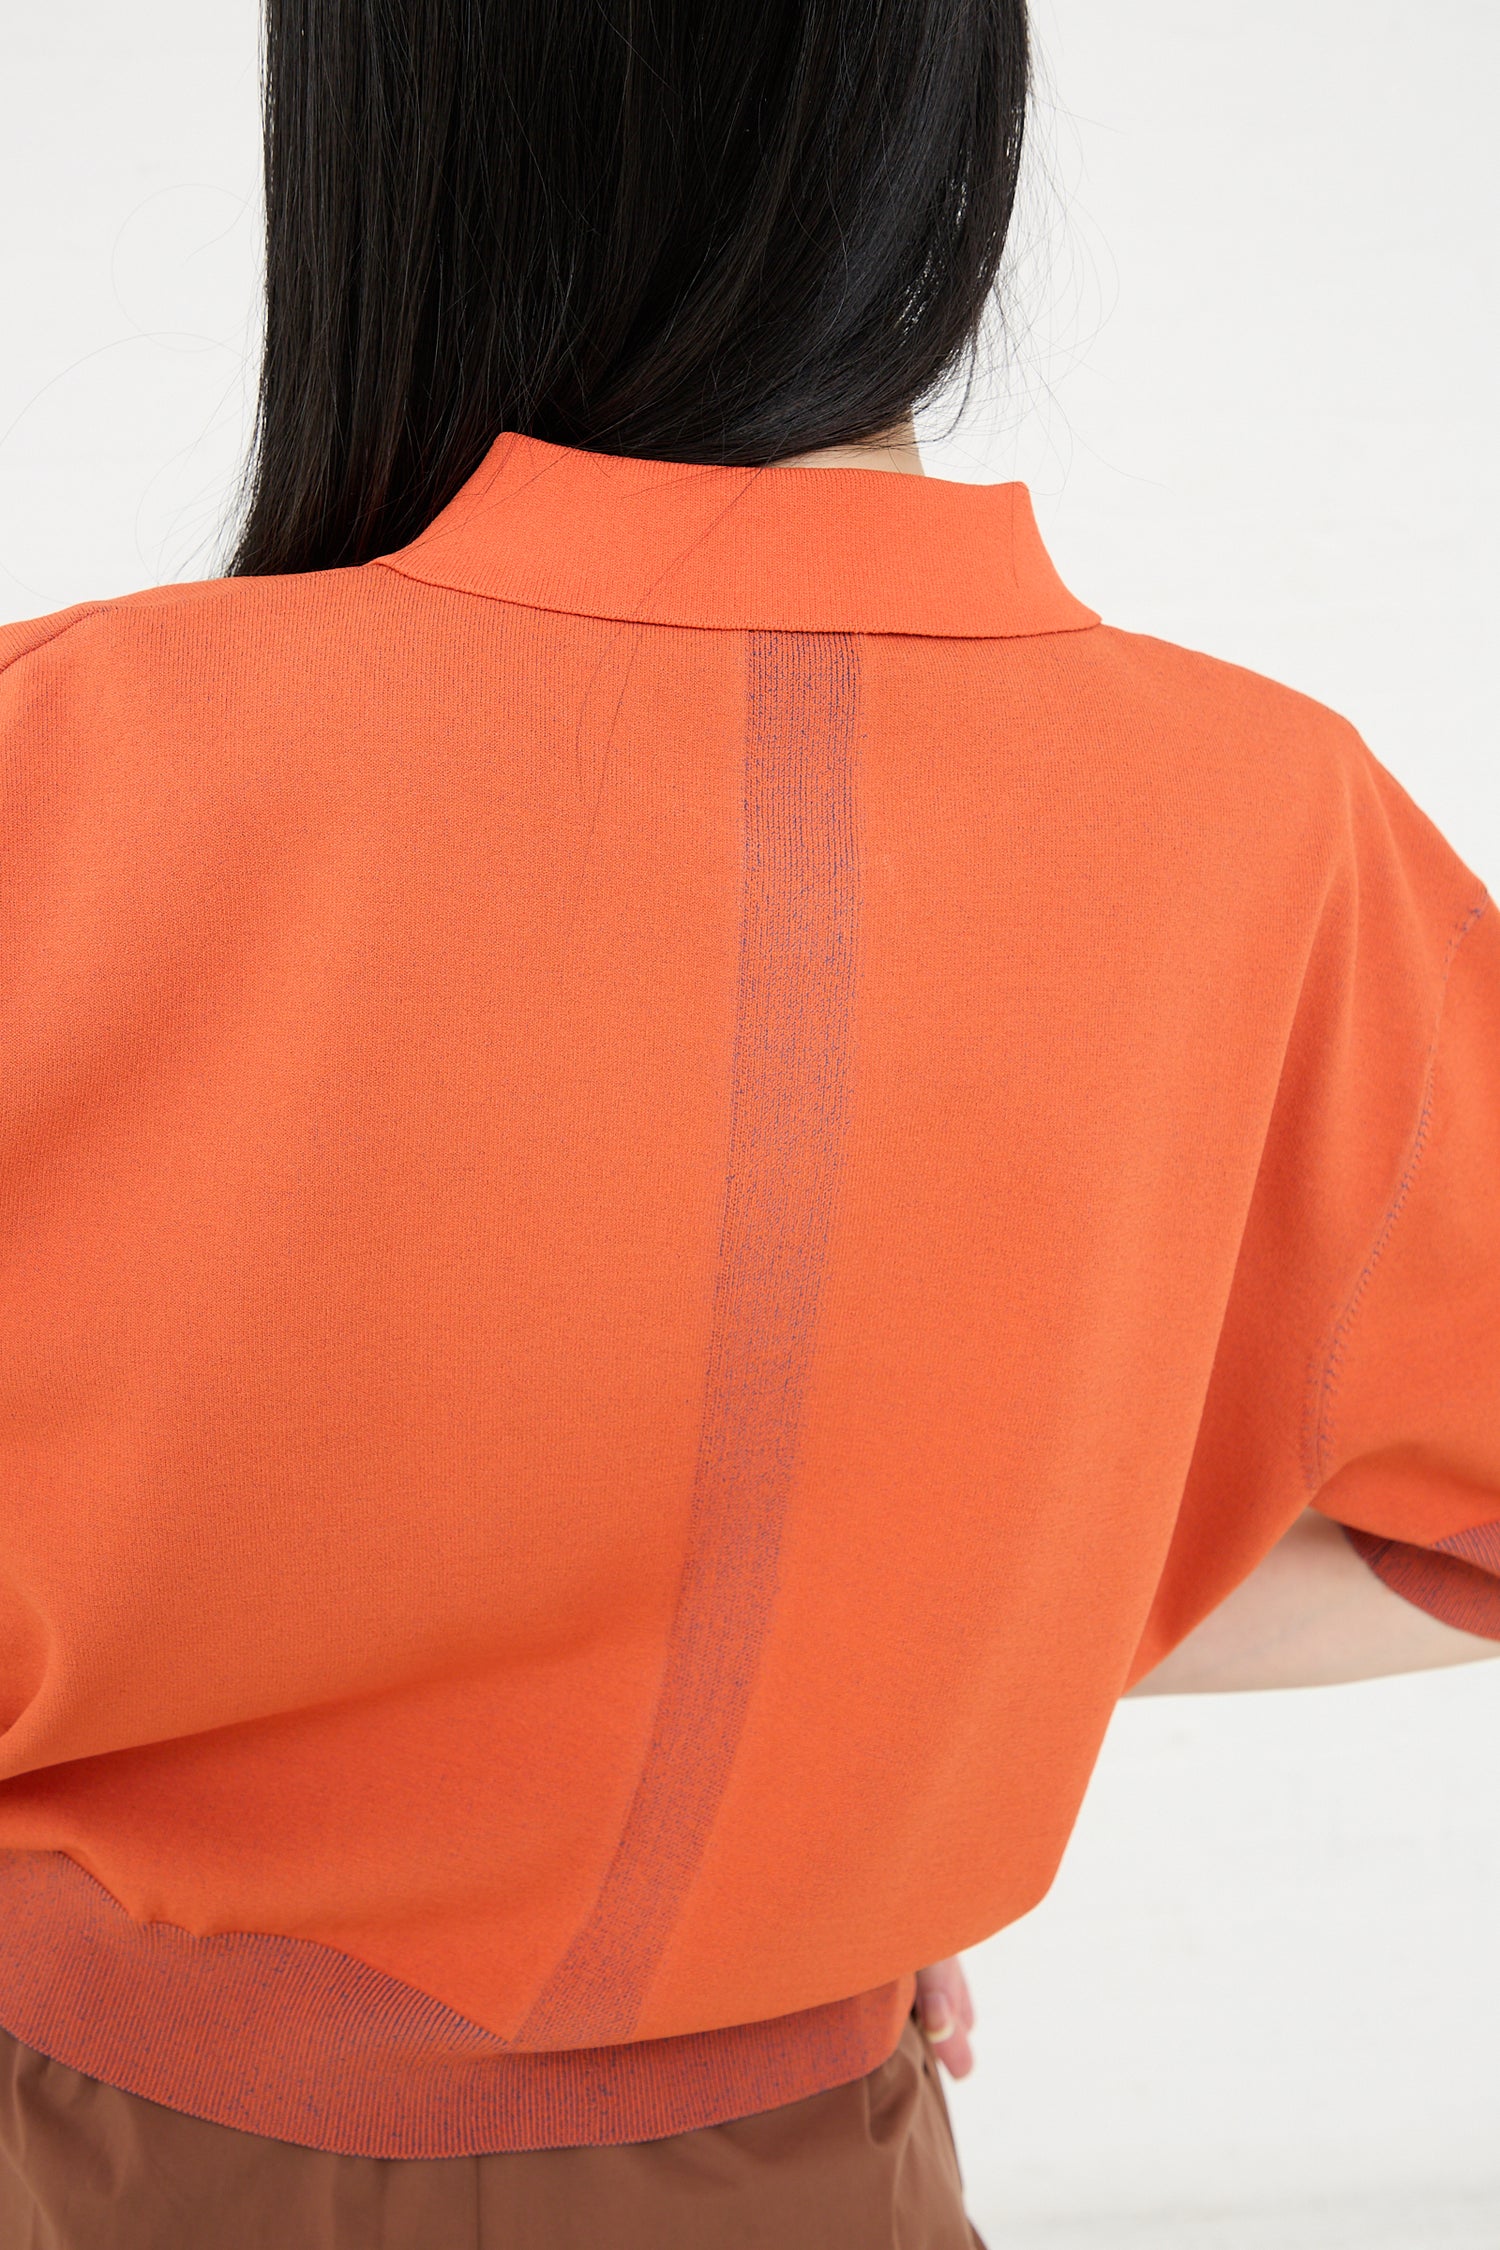 A person seen from behind wearing an Omin Top in Orange by Rachel Comey with a vertical seam detail.